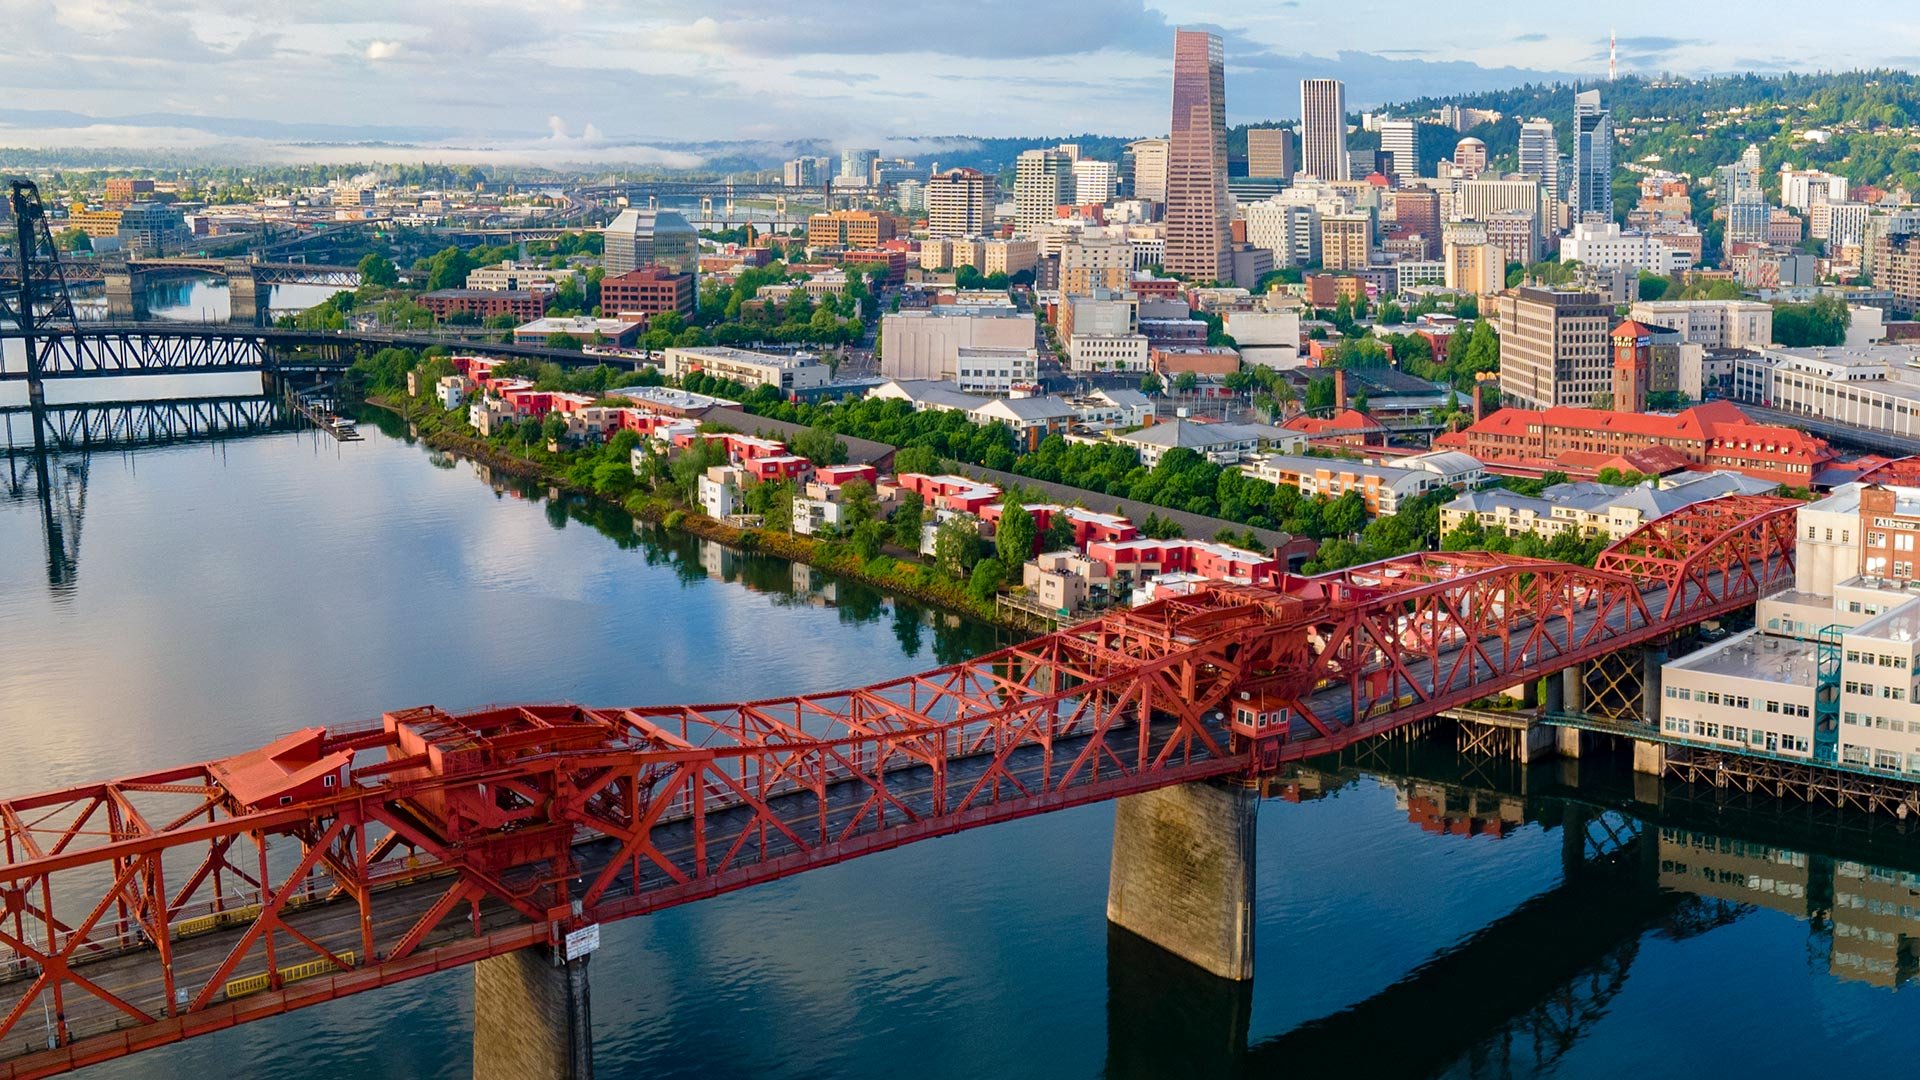 Top 20 Best Cities to Live in the USA - Portland, Oregon